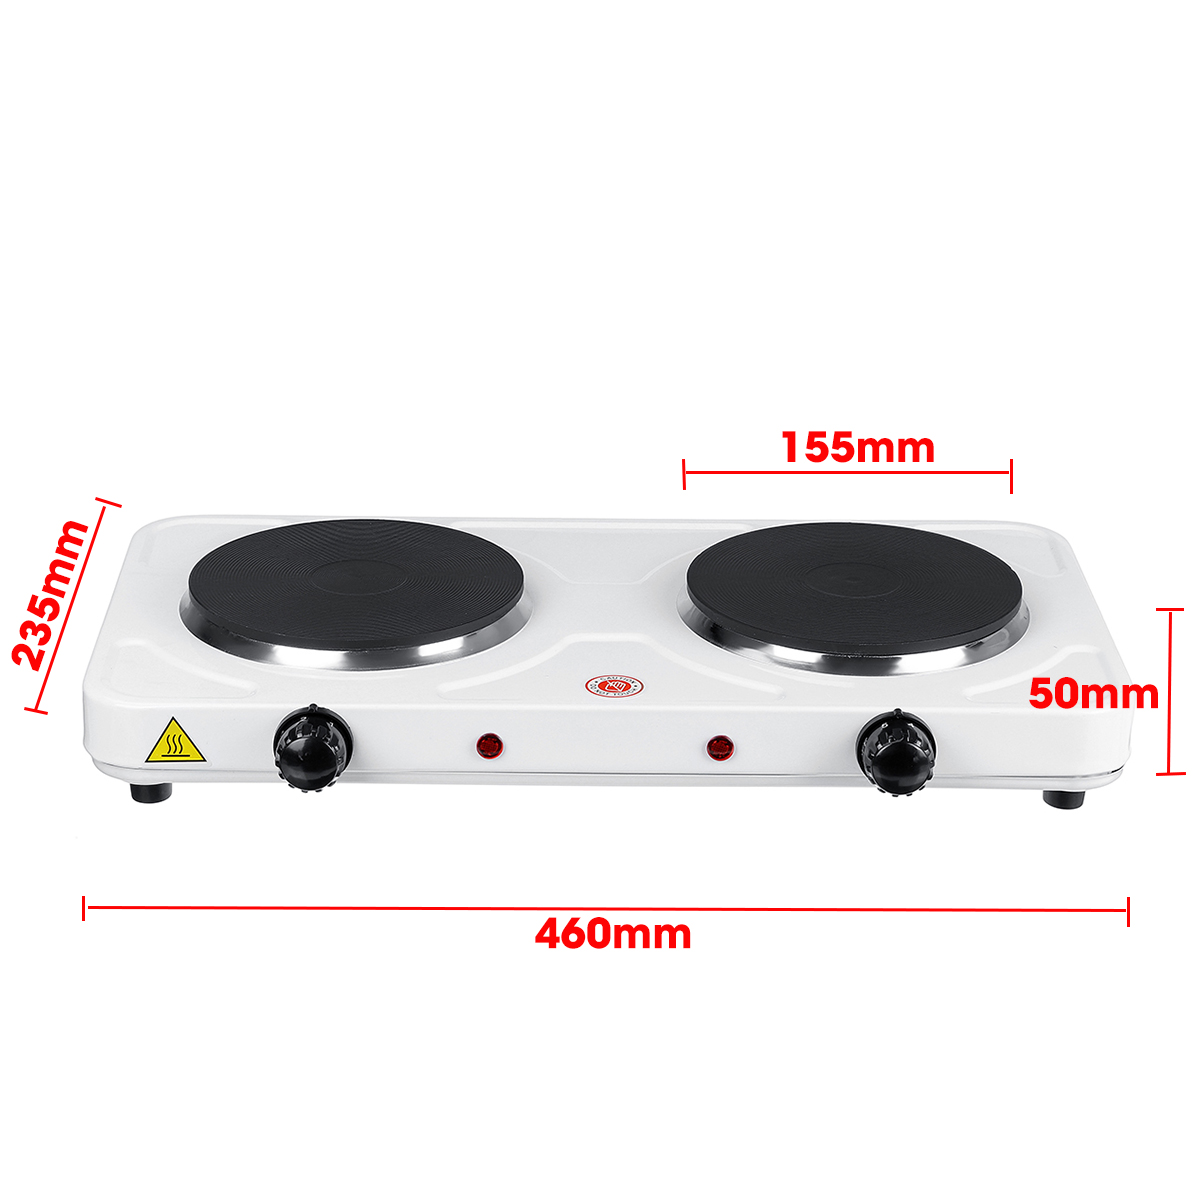 2000W Electric Double Burner Hot Plate Kitchen Camping Portable Stove Cooker